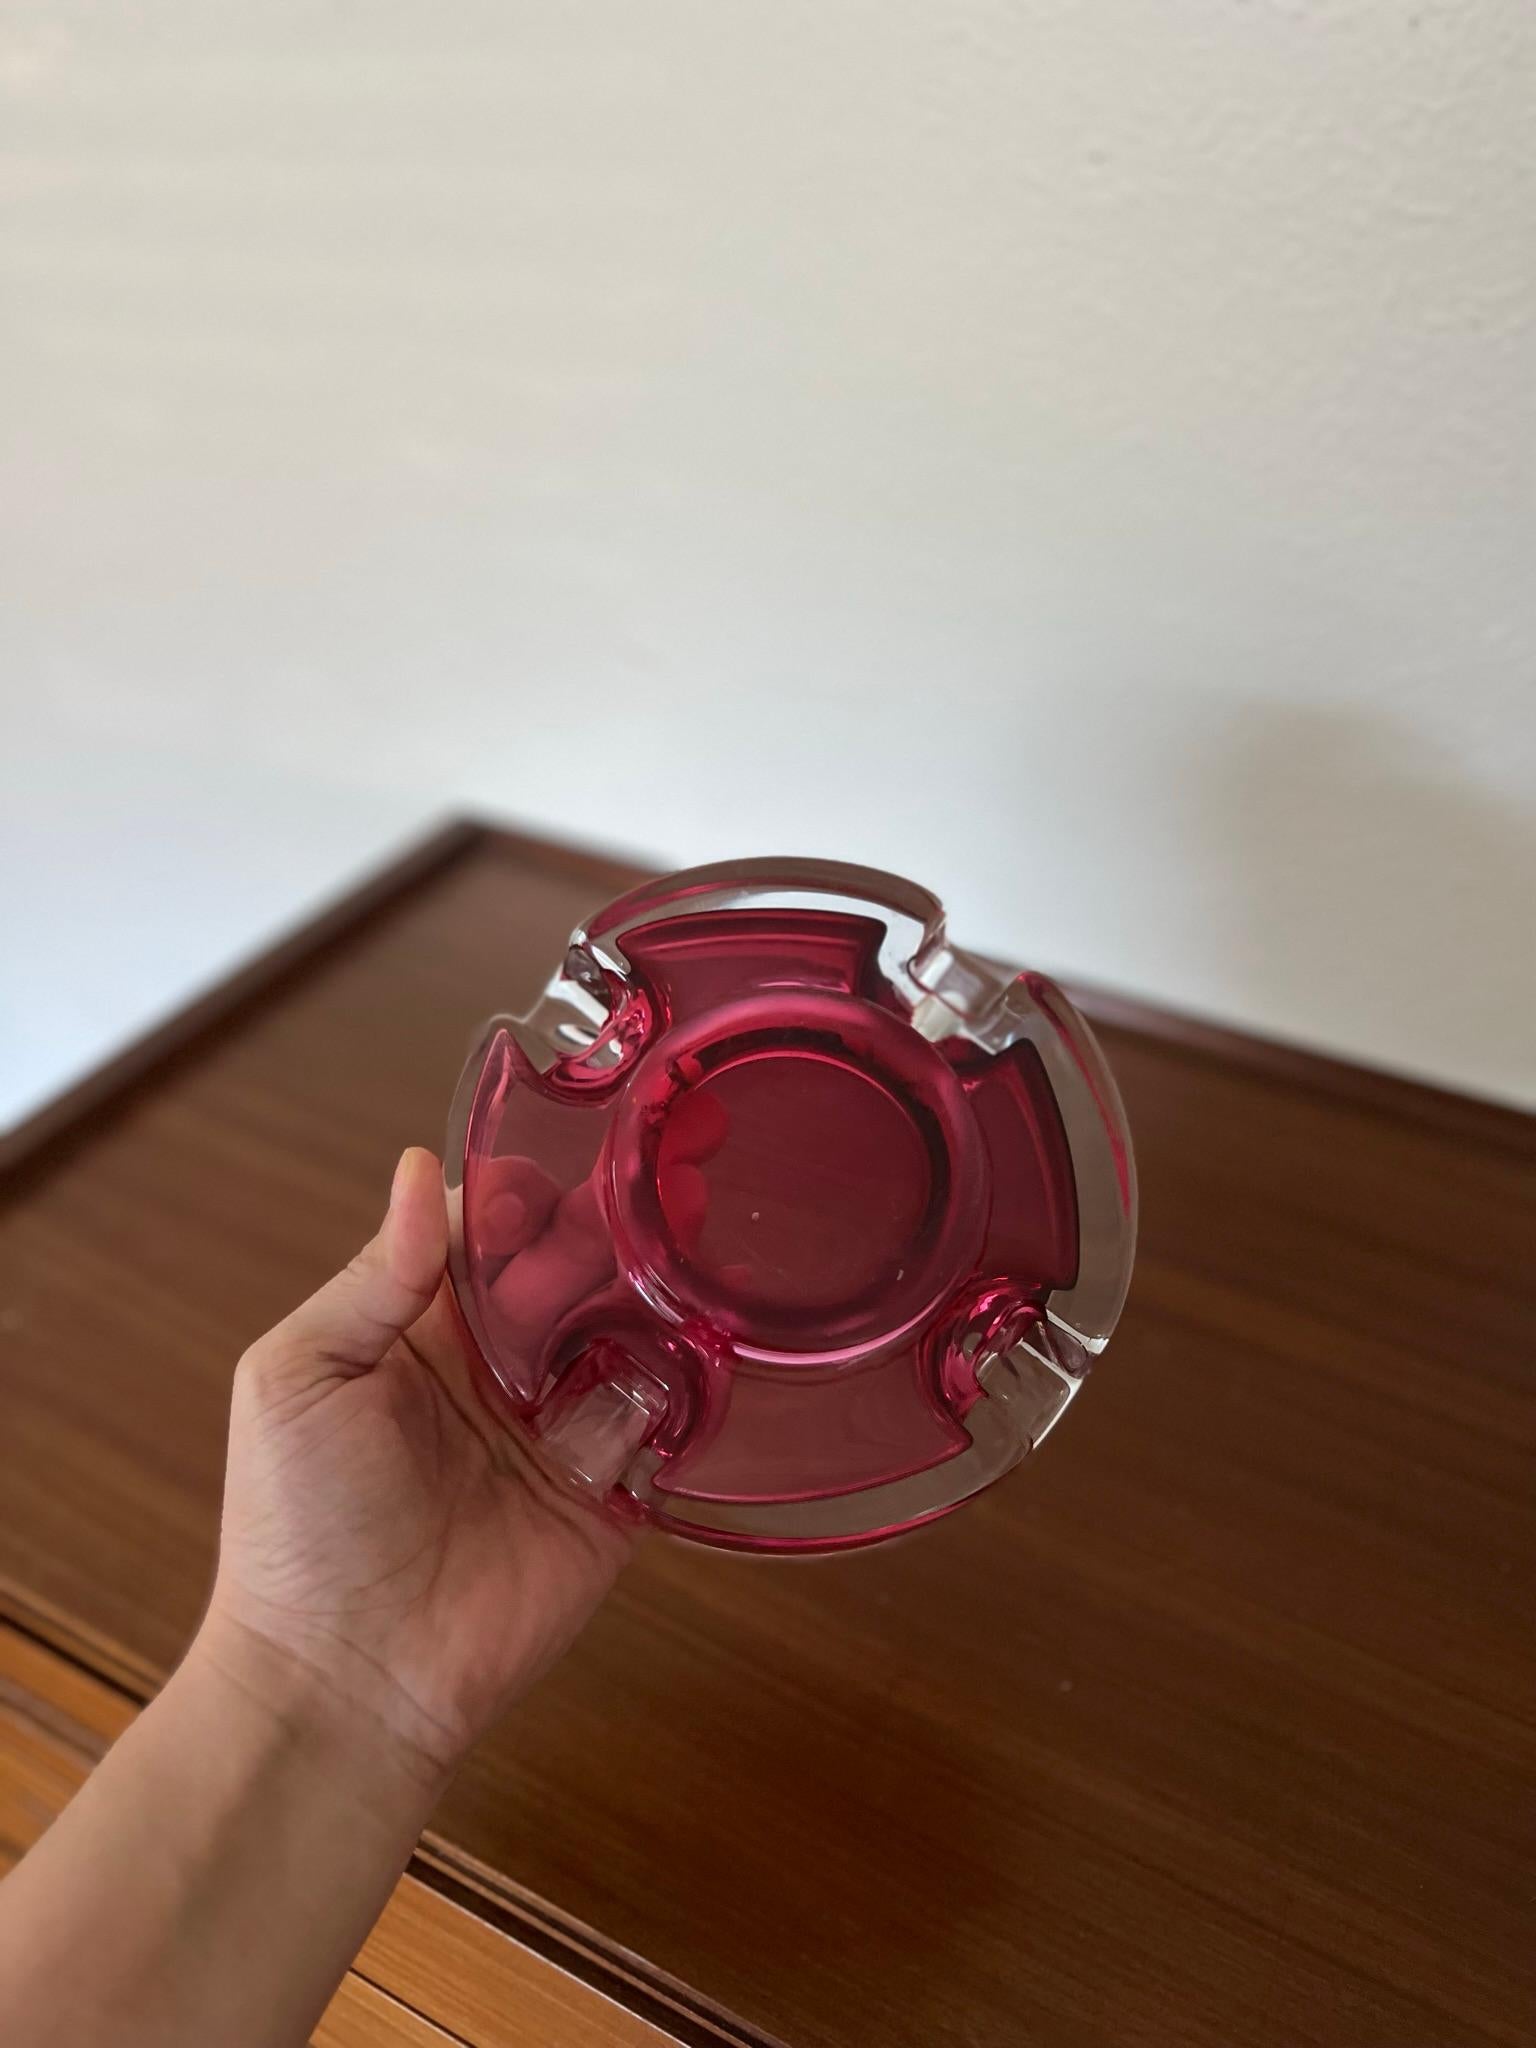 Crystal pink ashtray for val saint lambert, paper weight signed.

Free-blown pink and clear crystal ashtray by Val Saint Lambert.
Could be used as a catchall, vide poche or decorative desk accessories.
Use it as a change tray or jewelry tray or